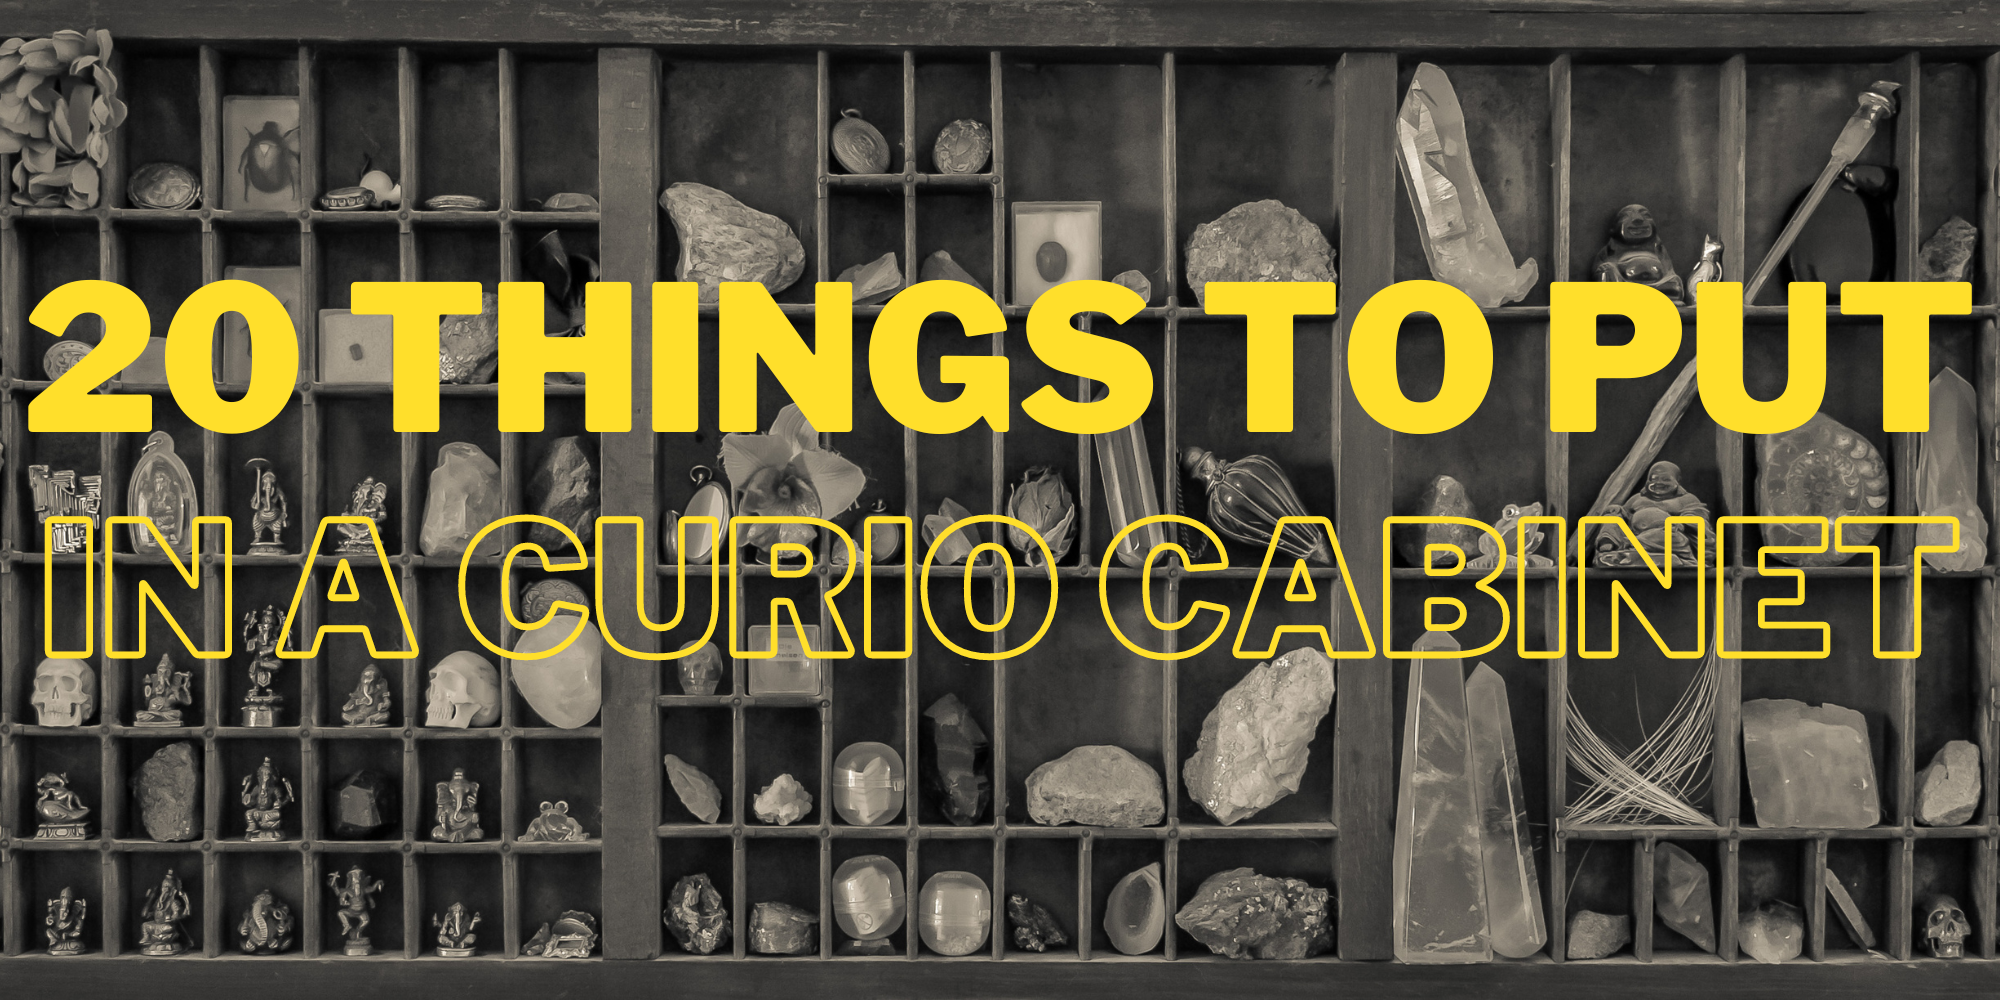 20 Things to Put in a Curio Cabinet - Home Bars USA